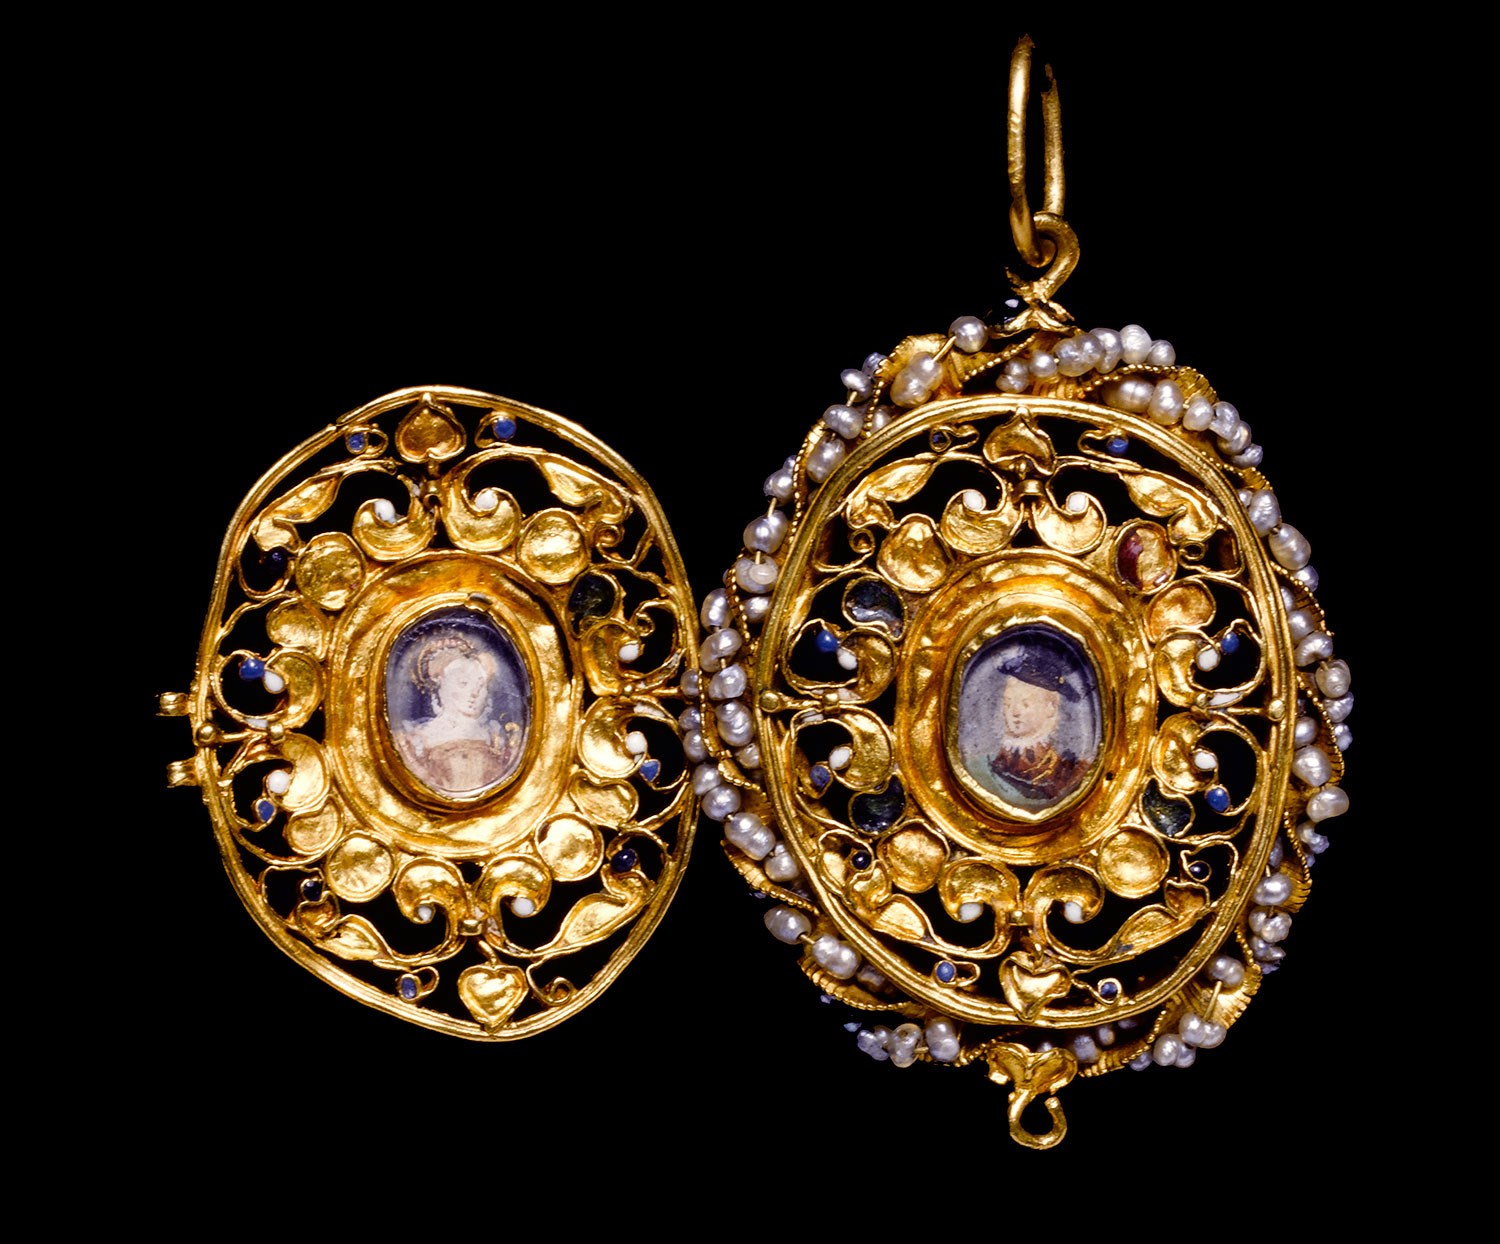 The Penicuik jewels, a gold locket said to show Mary, Queen of Scots and her son James on the reverse